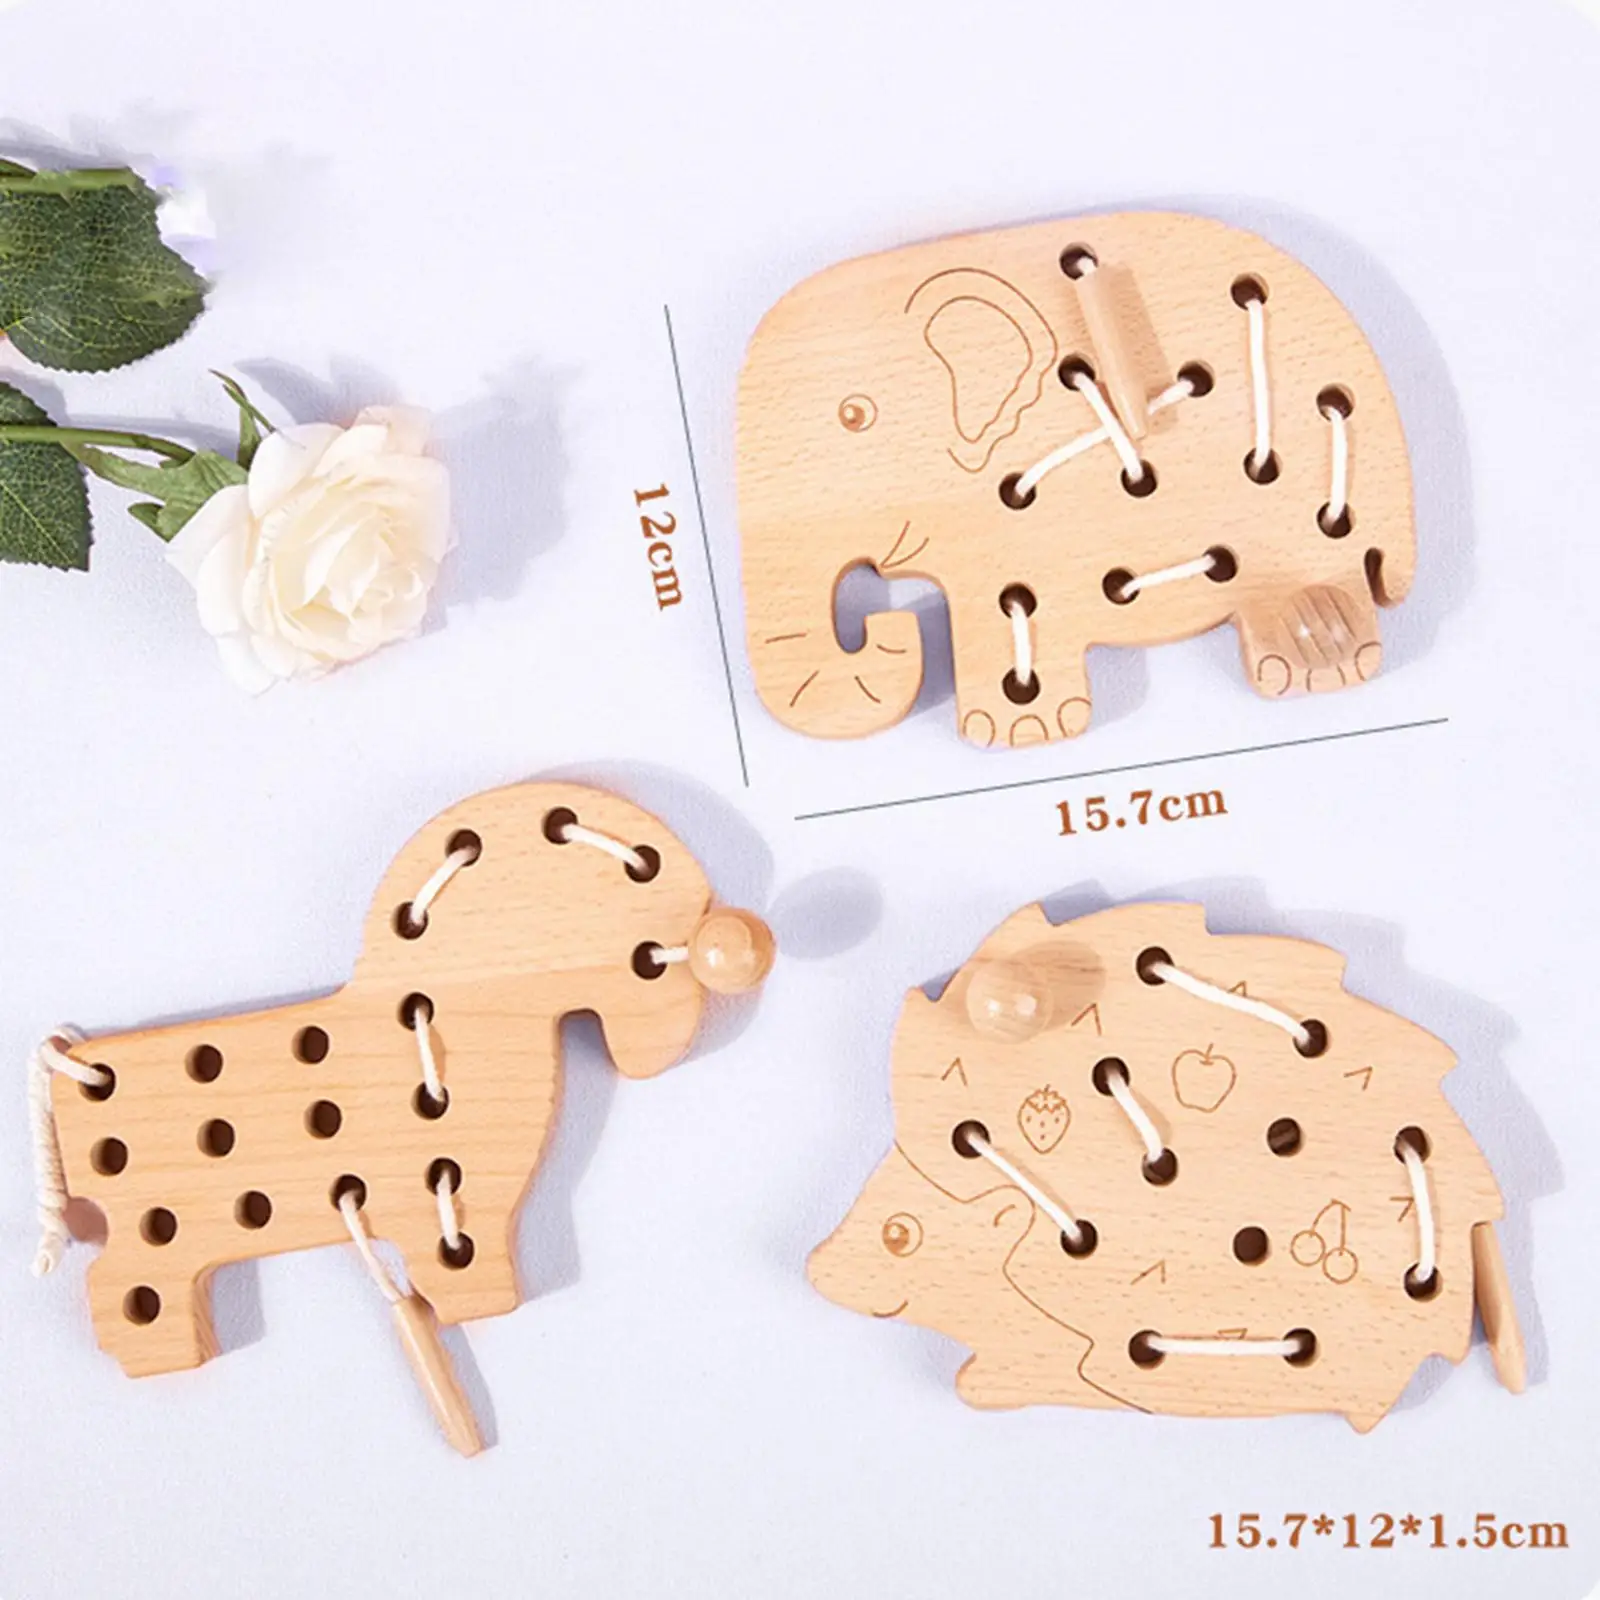 3x Wooden Lacing Threading Toys Wood Lace Block Puzzle for Kids Baby Birthday Gift